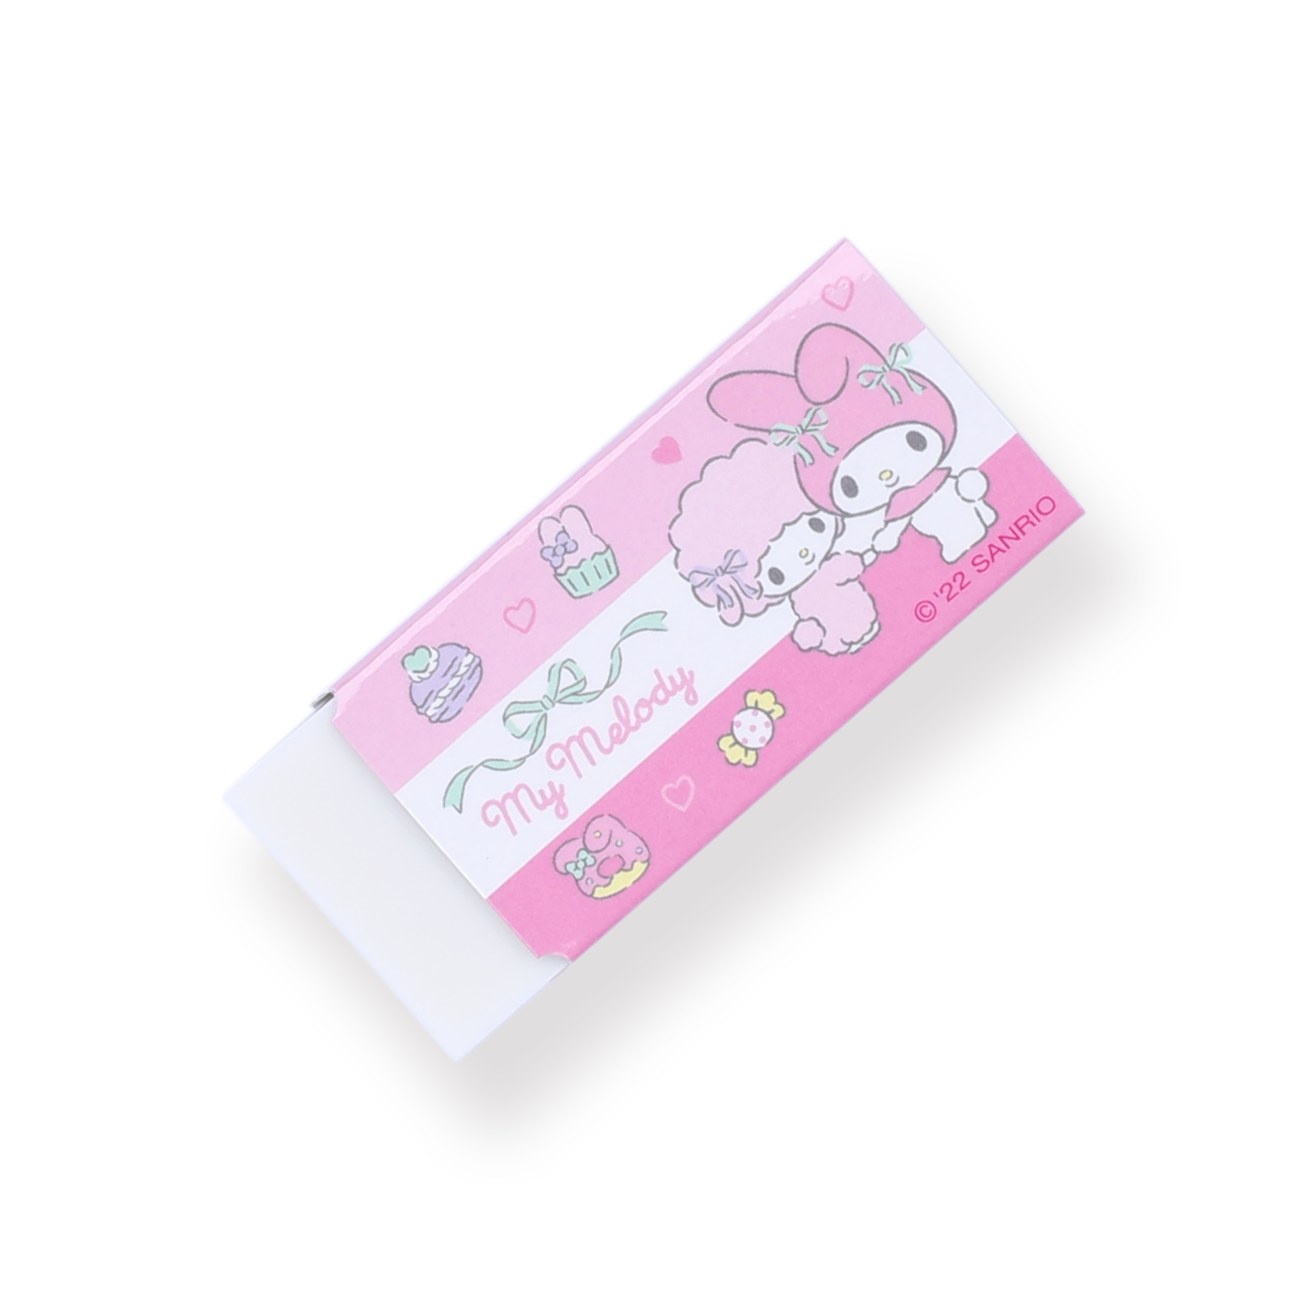 Tombow MONO x Sanrio Limited Edition Eraser - My Melody - Stationery Pal